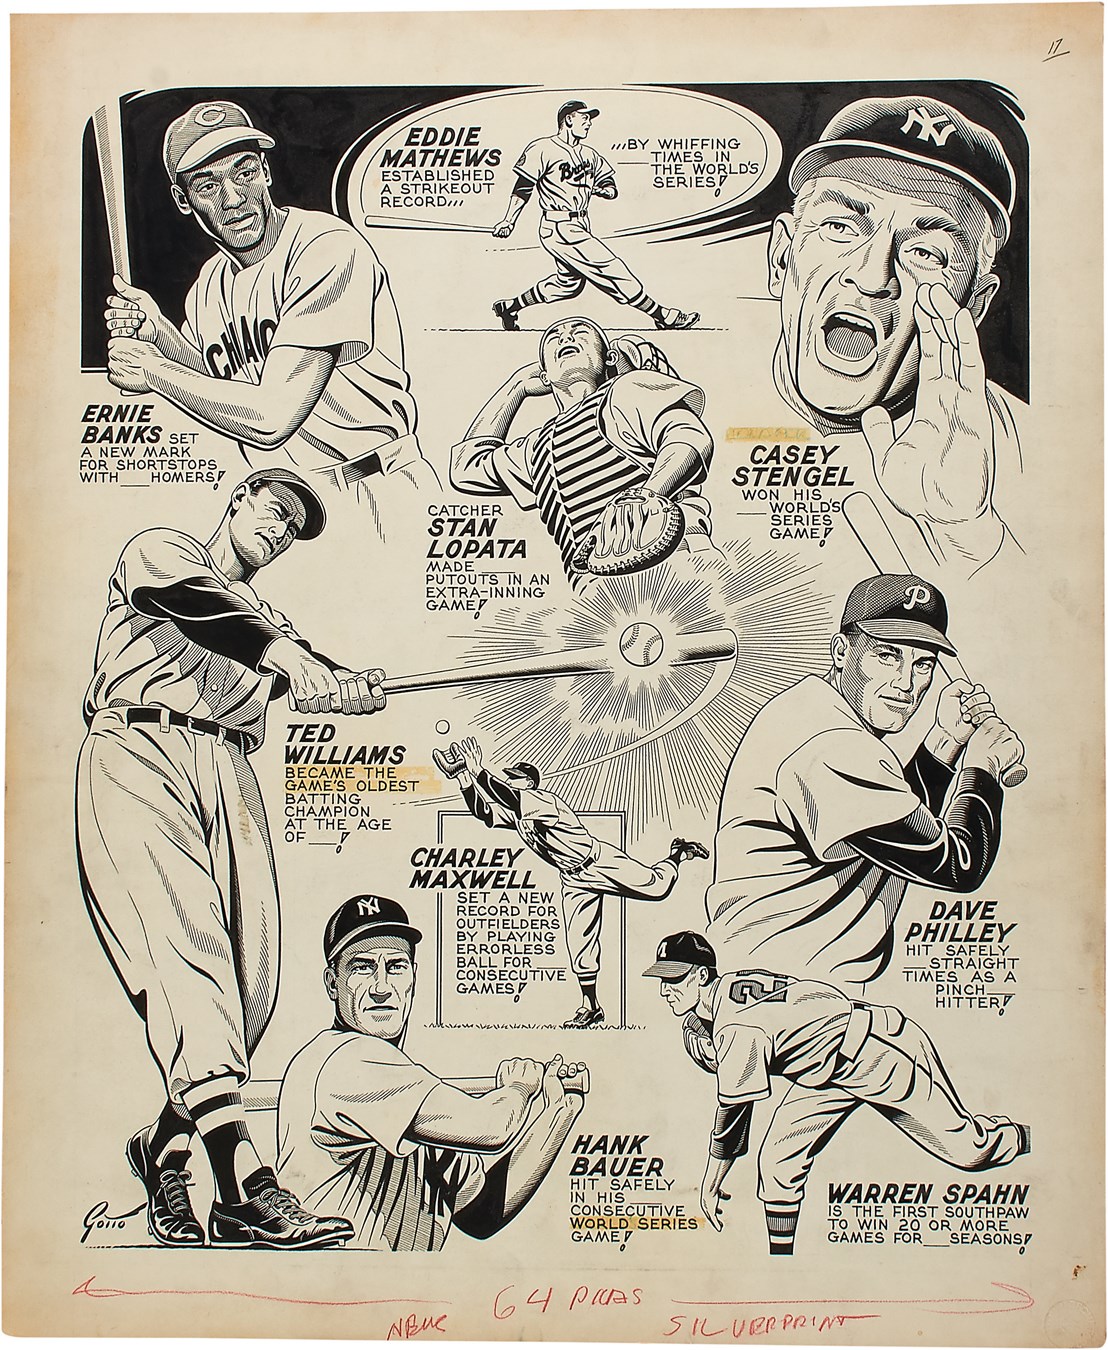 1958 Ted Williams, Ernie Banks, Casey Stengel, Warren Spahn "Records" by Ray Gotto - Published in The Sporting News